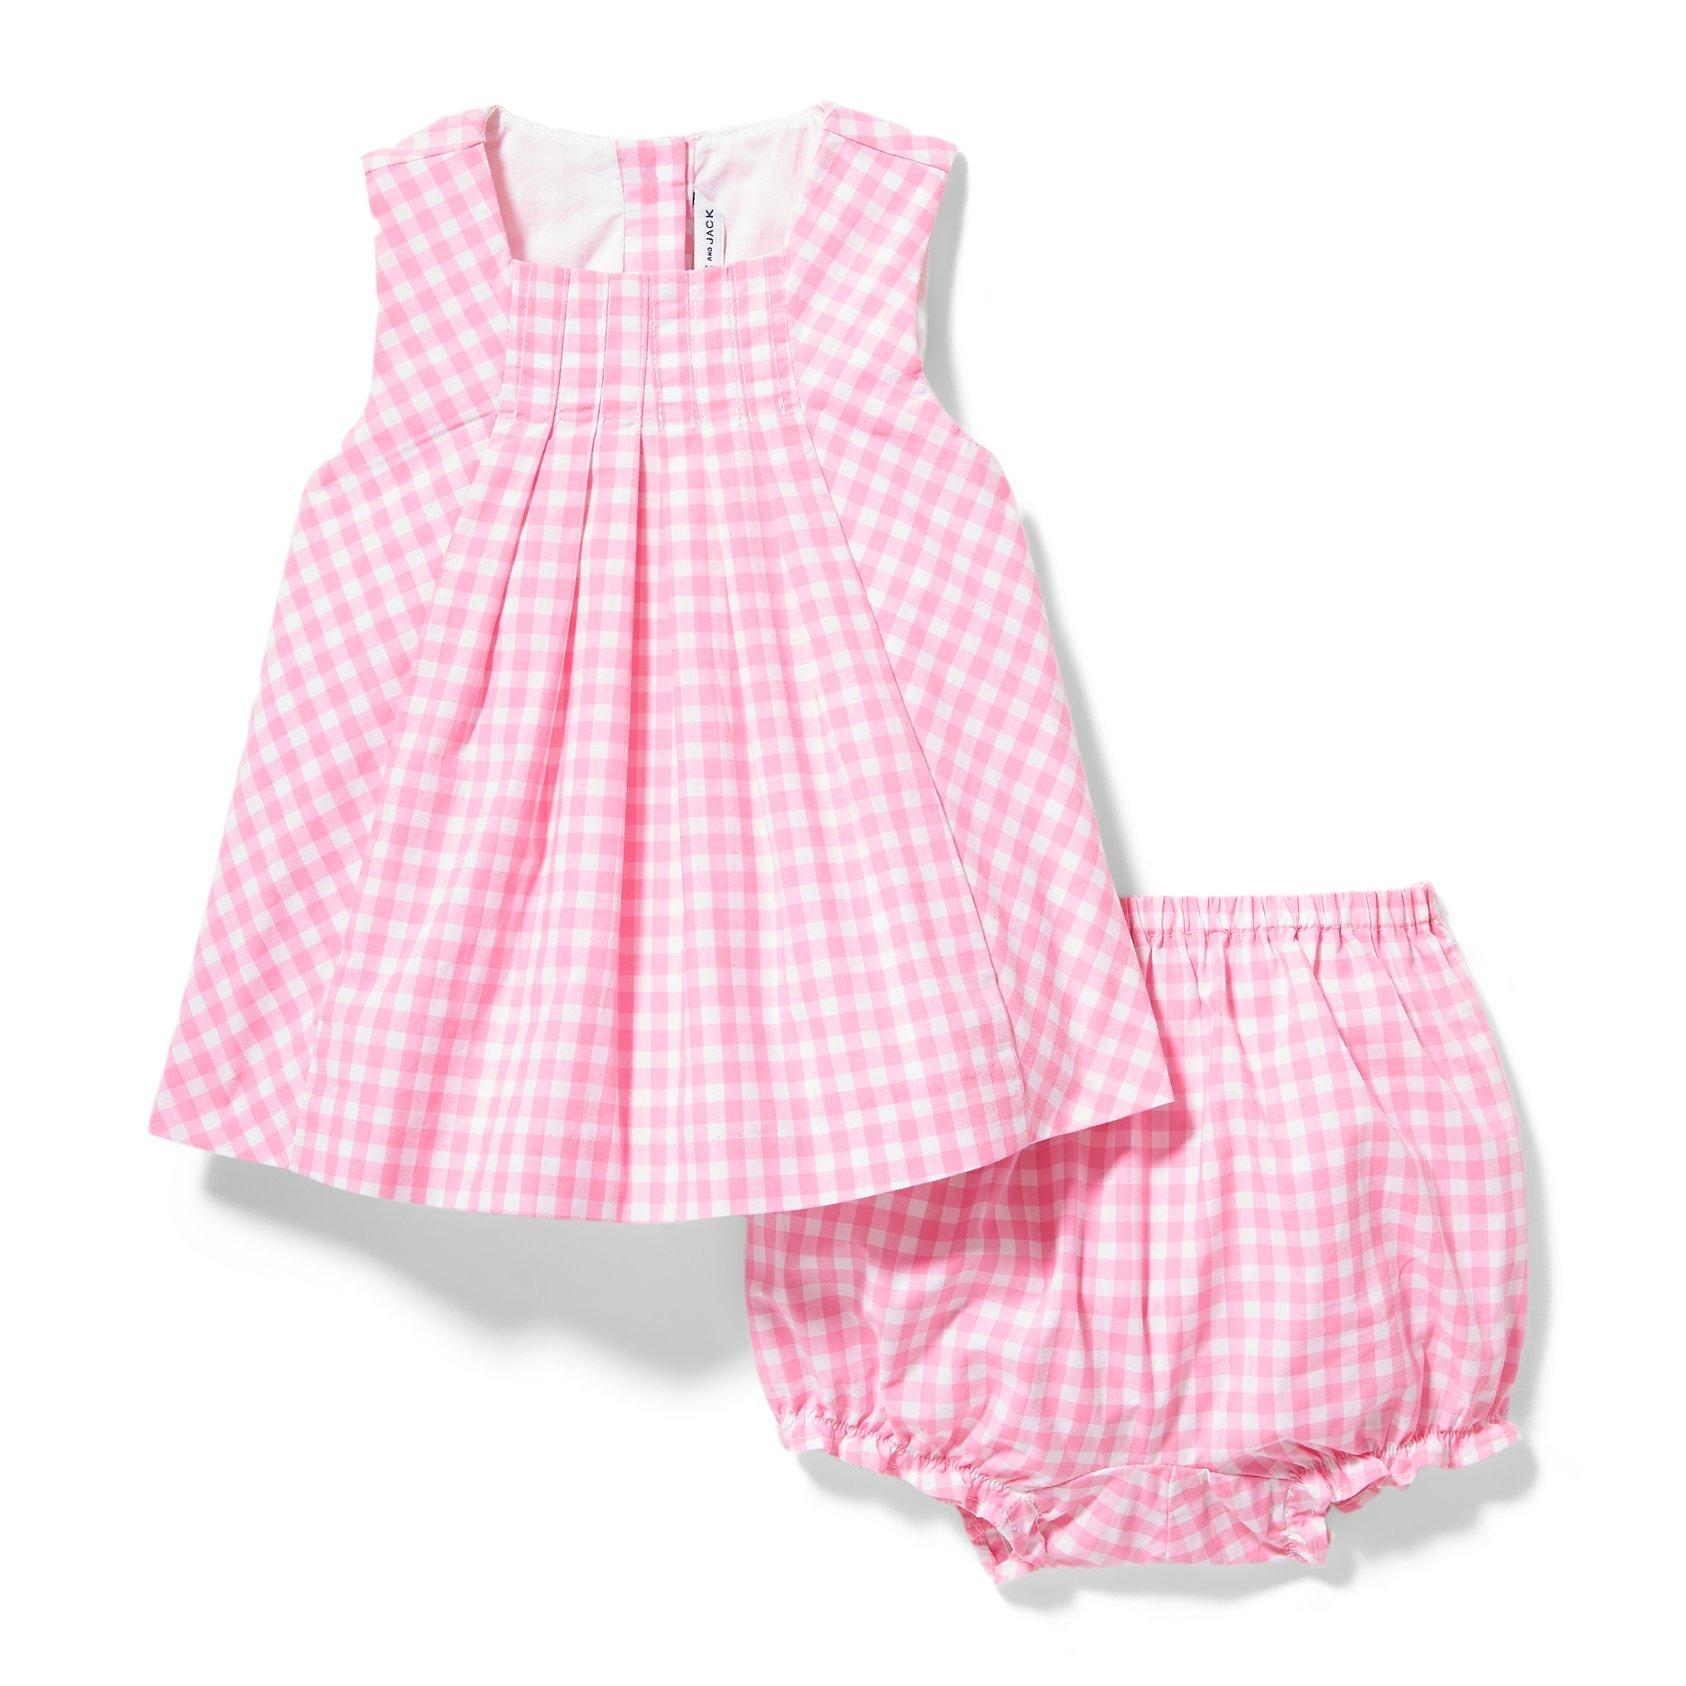 Newborn Peppy Pink Gingham Pink Gingham Matching Set by Janie and Jack